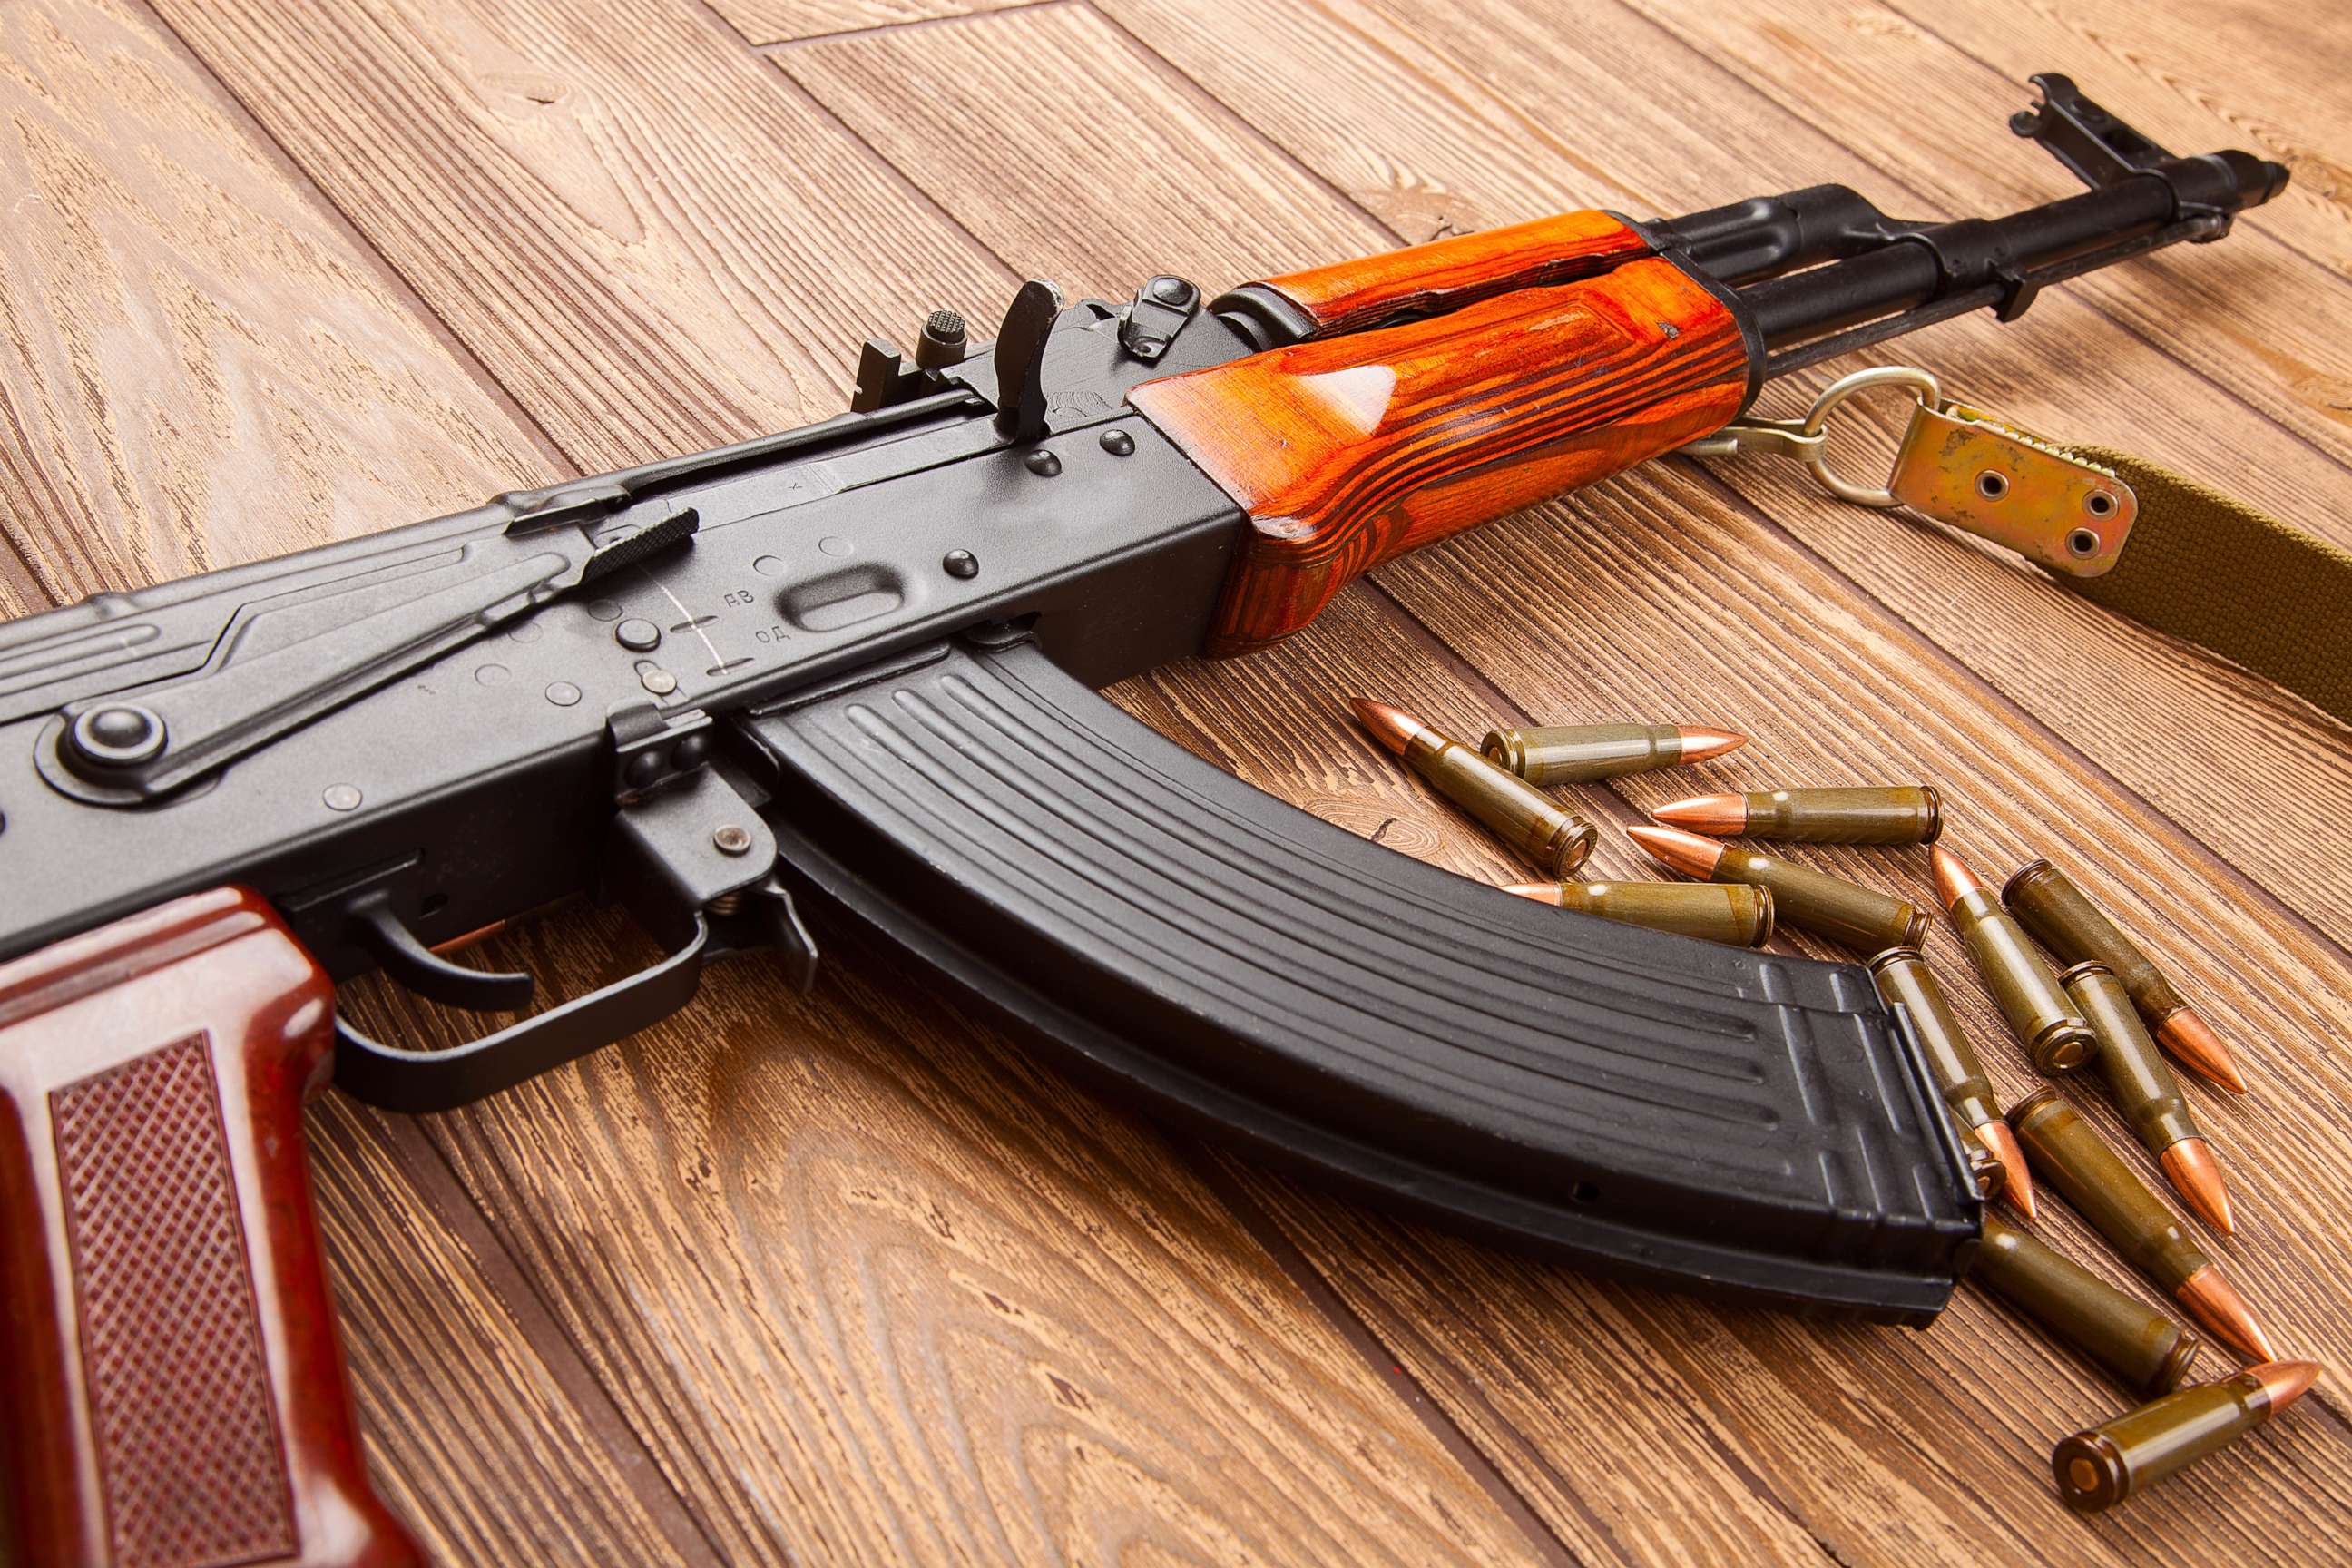 PHOTO: An AK-47 assault rifle and ammunition are pictured in an undated stock photo.